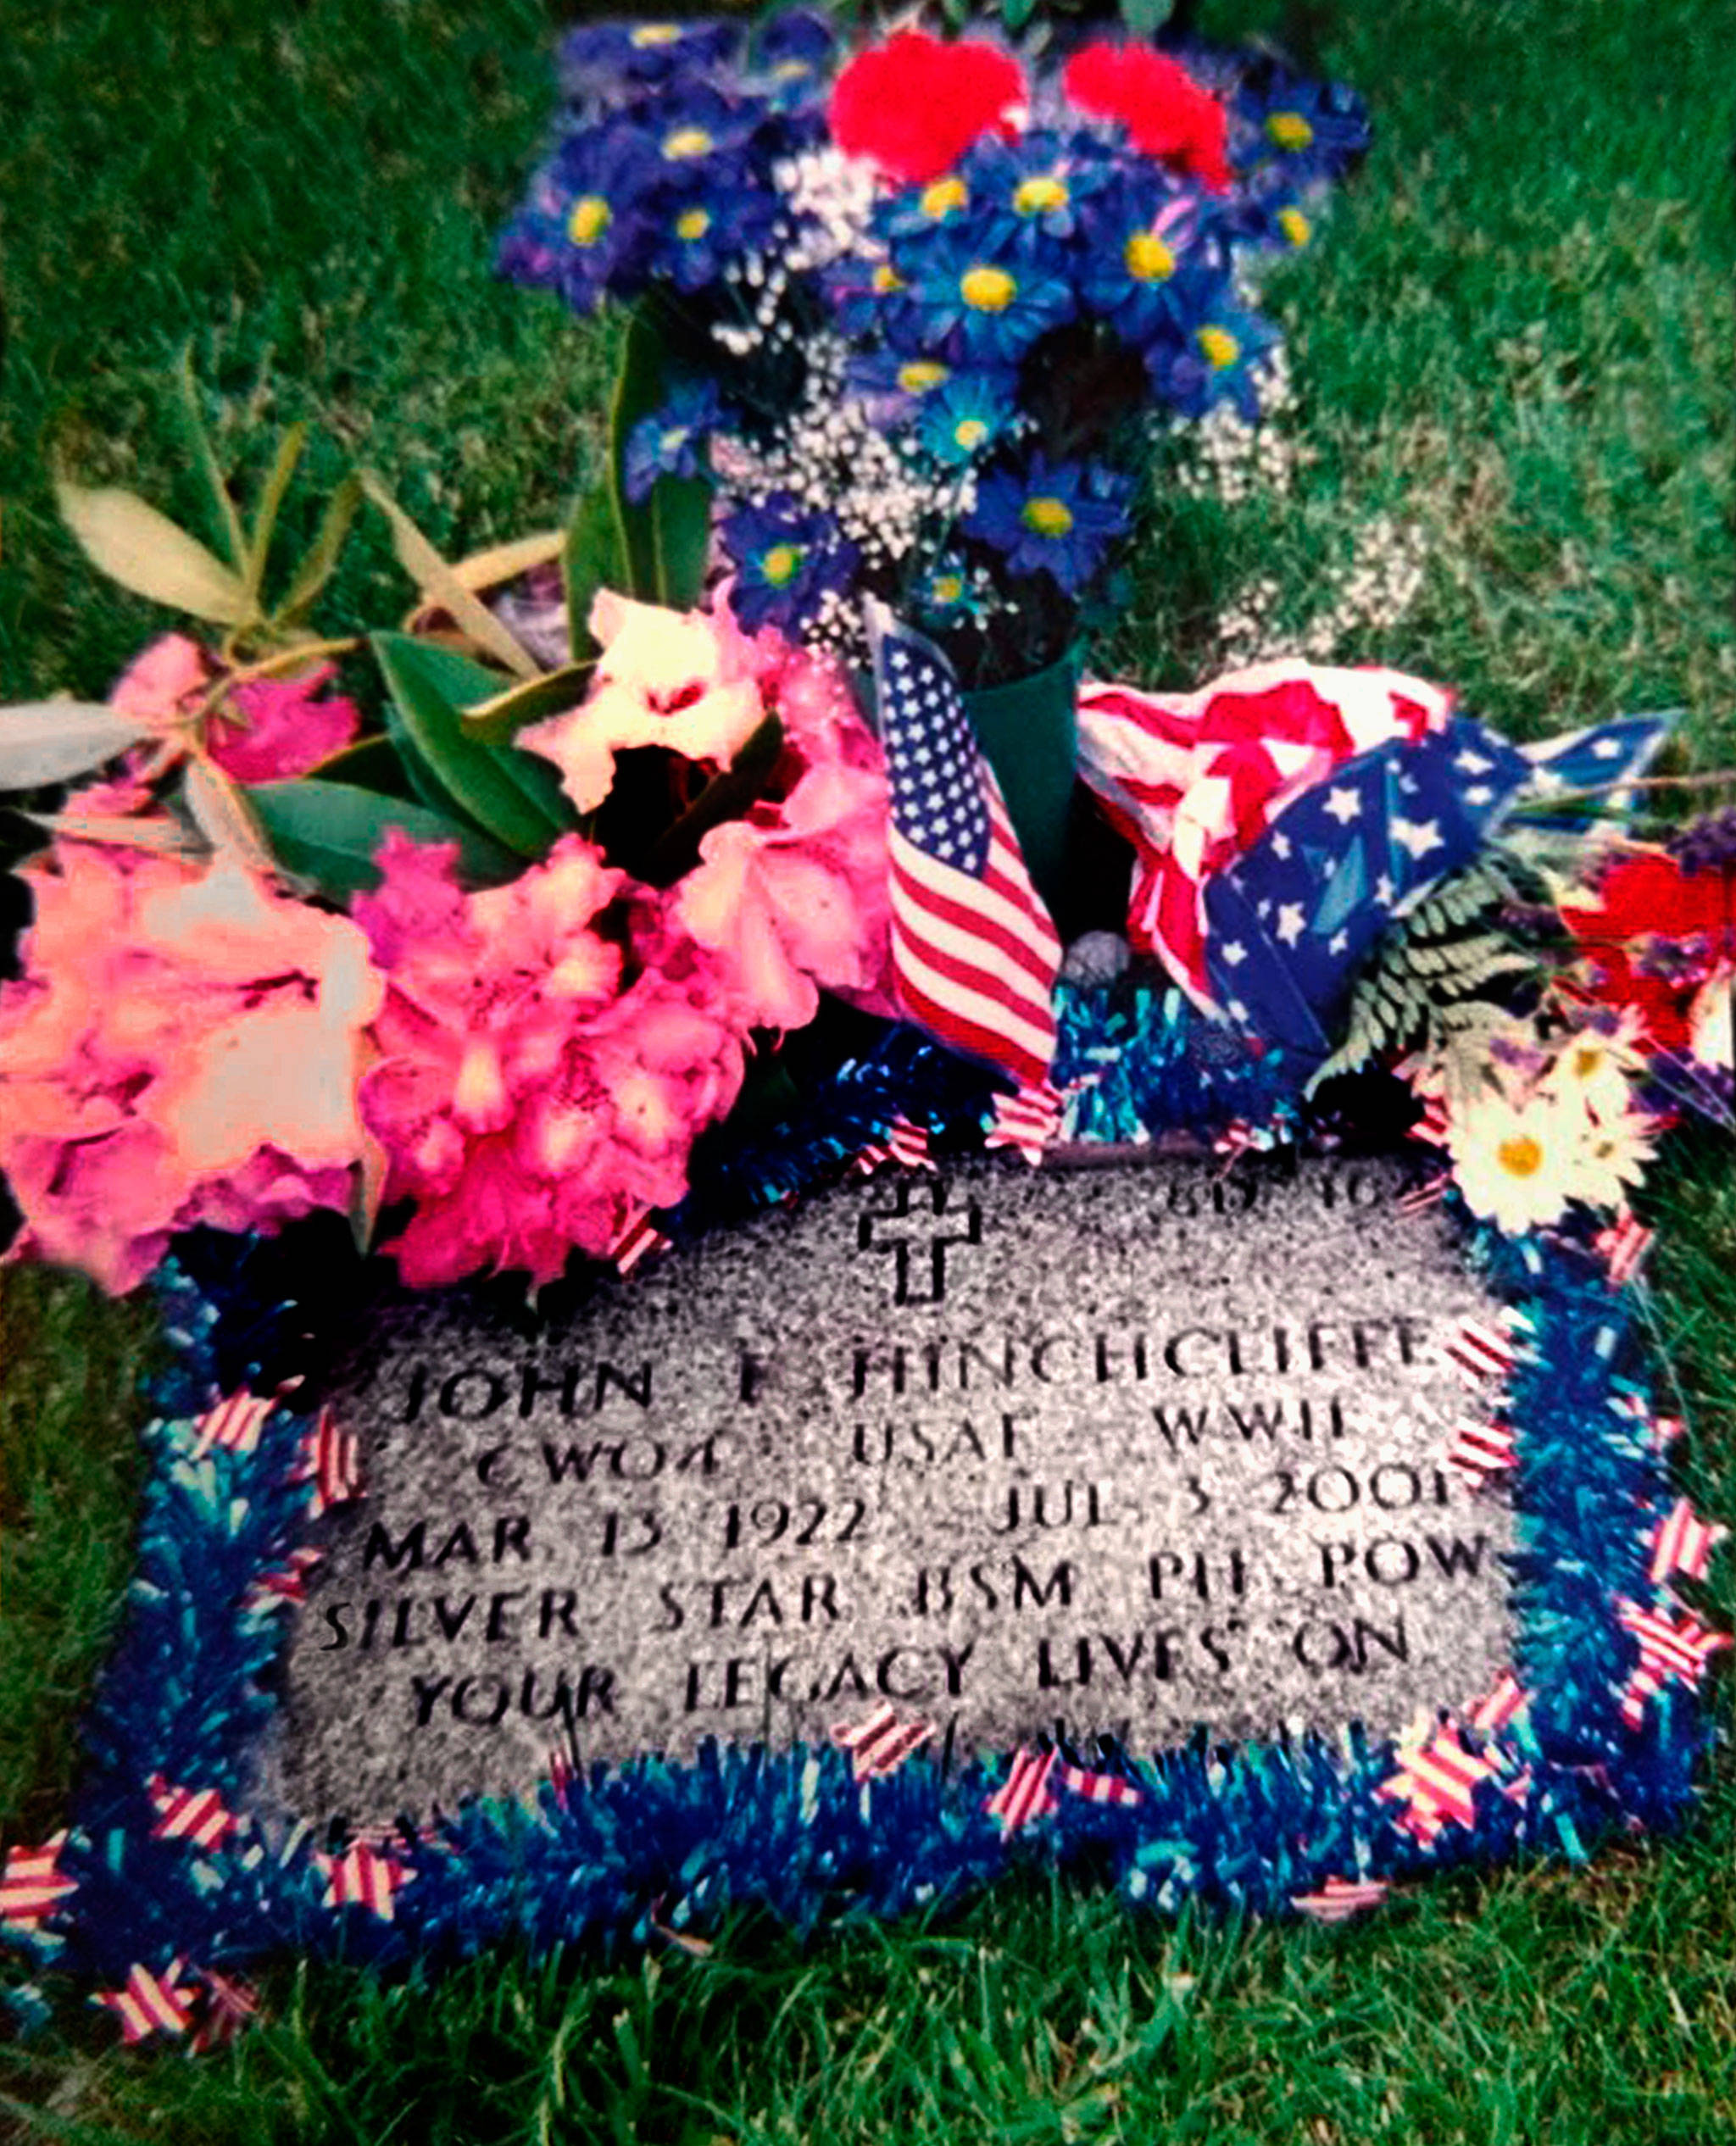 John Hinchcliffe, who served with the 1st Infantry Division on D-Day, is buried at Tahoma National Cemetery in Kent. Some of his ashes were scattered at Omaha Beach in France. (Contributed Photo)